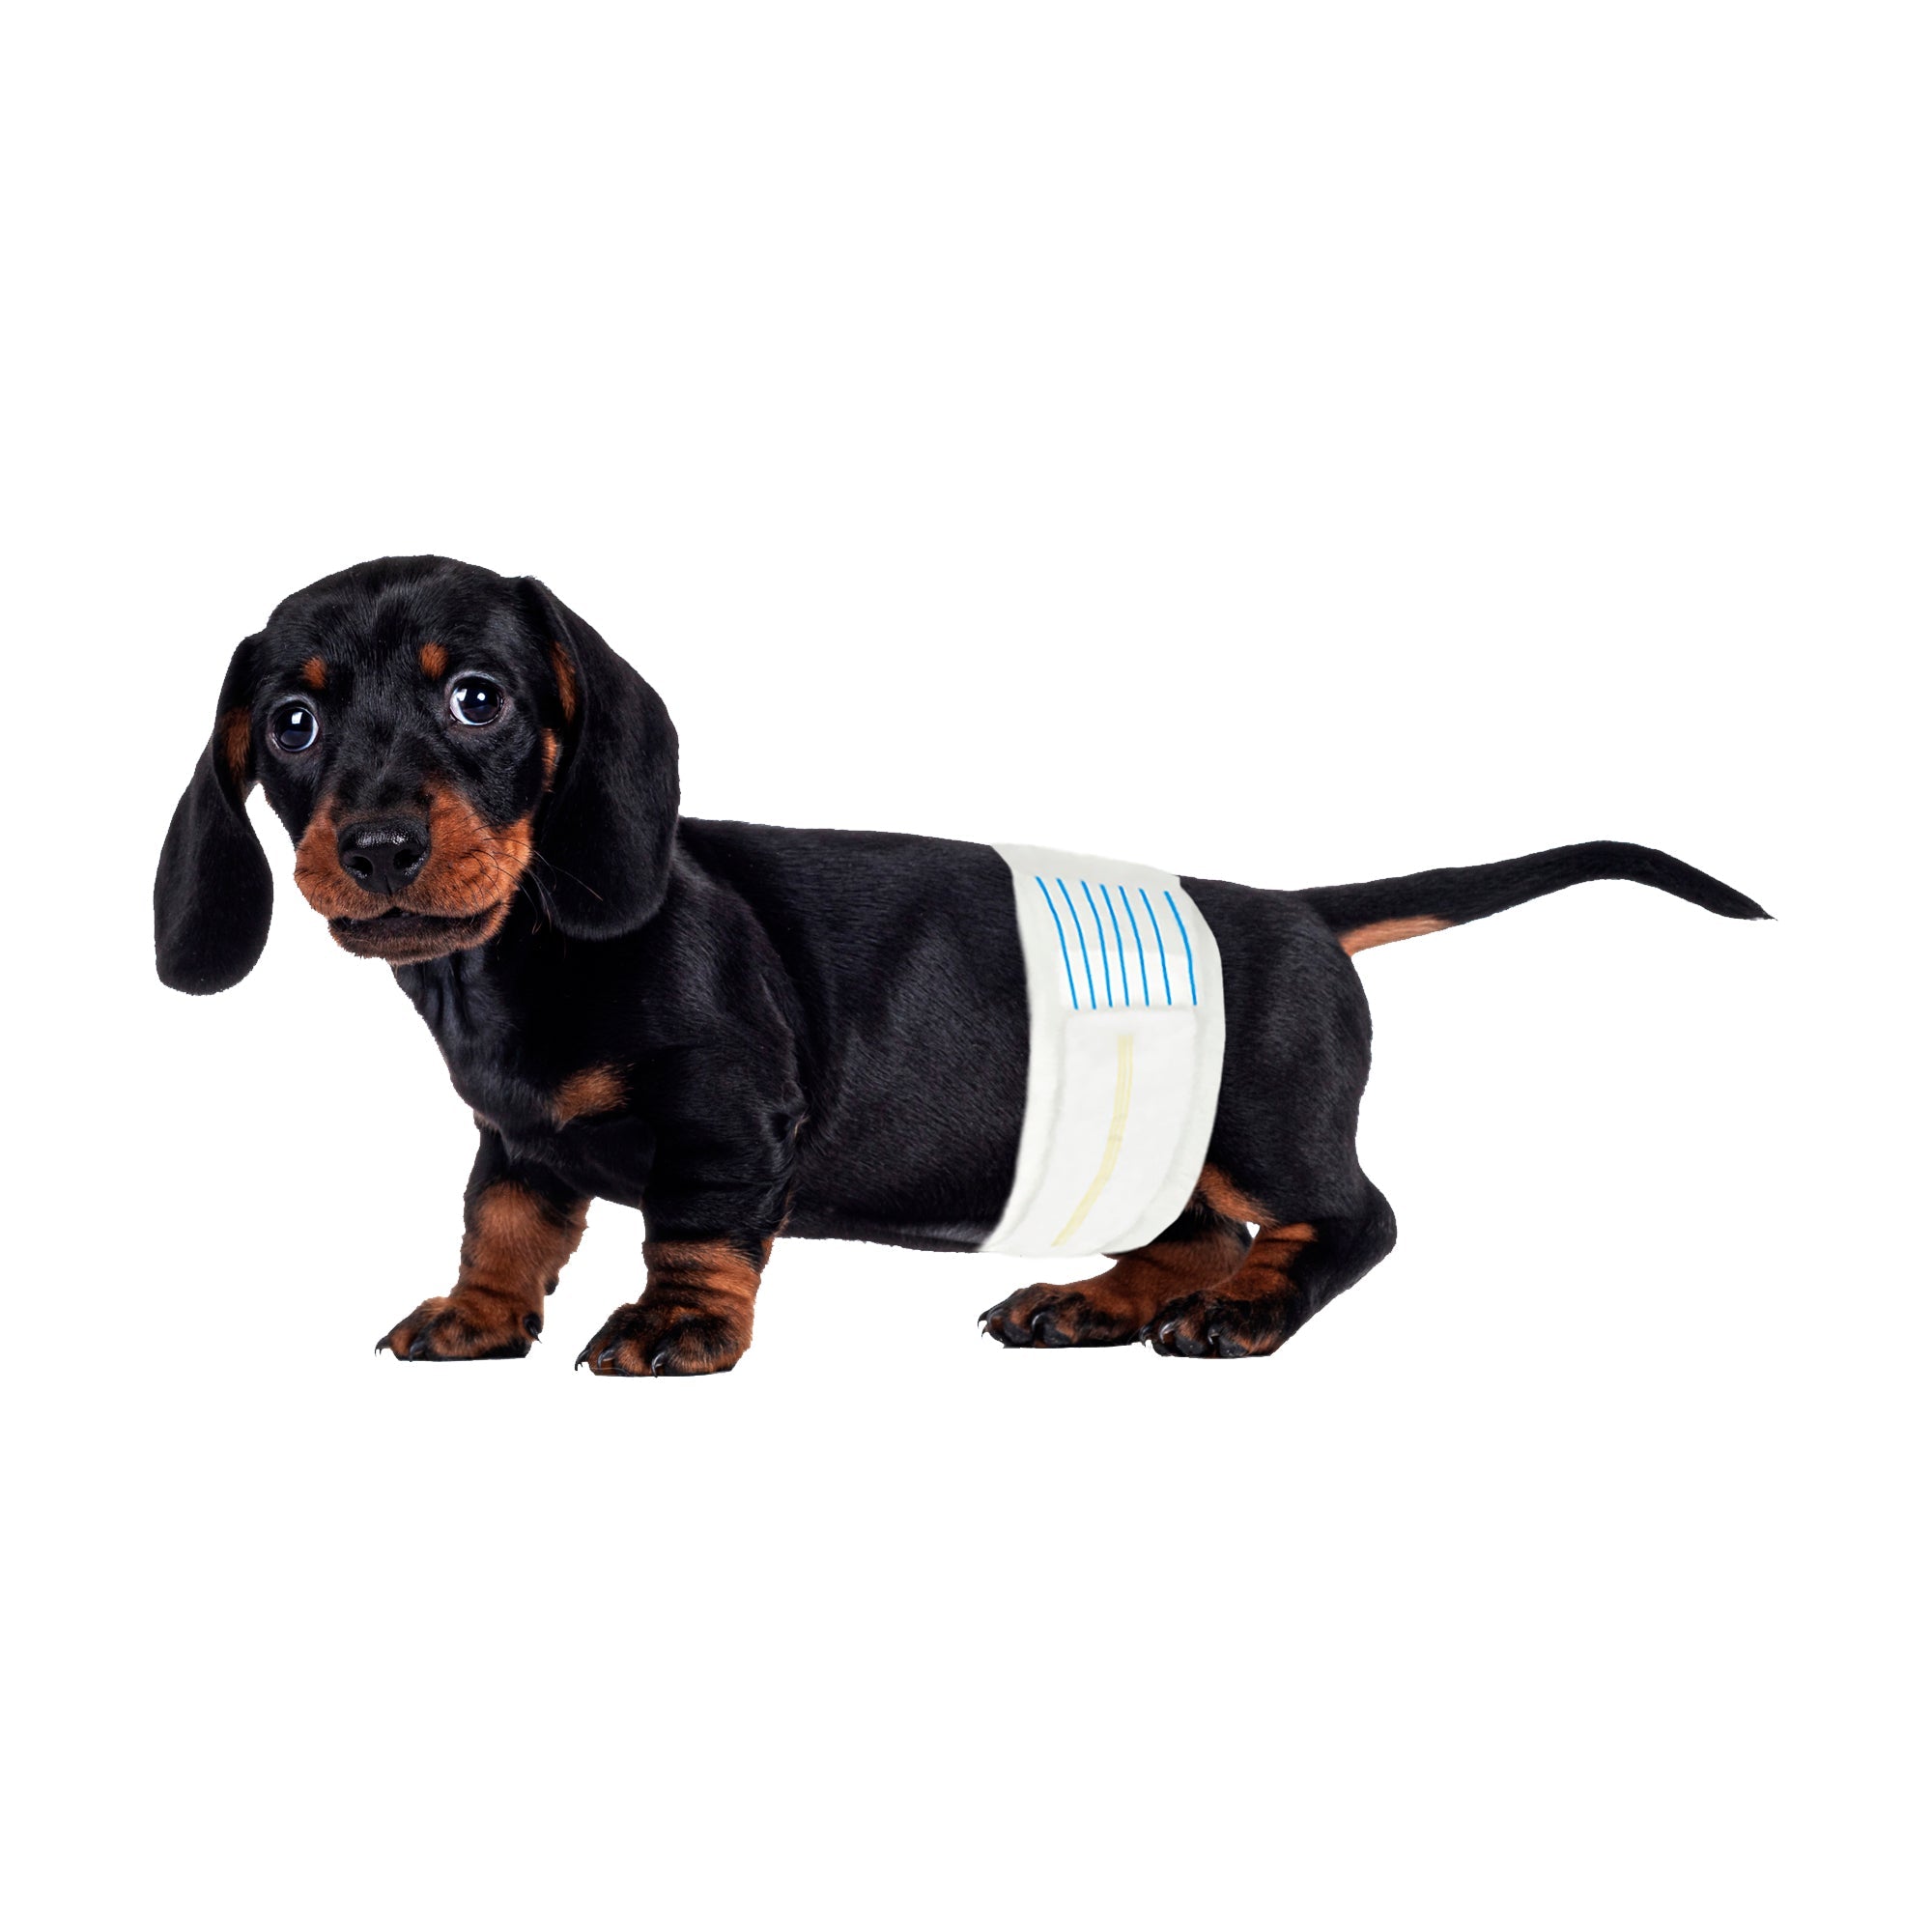 BV Male Small Dog Disposable Wraps - 50 Count